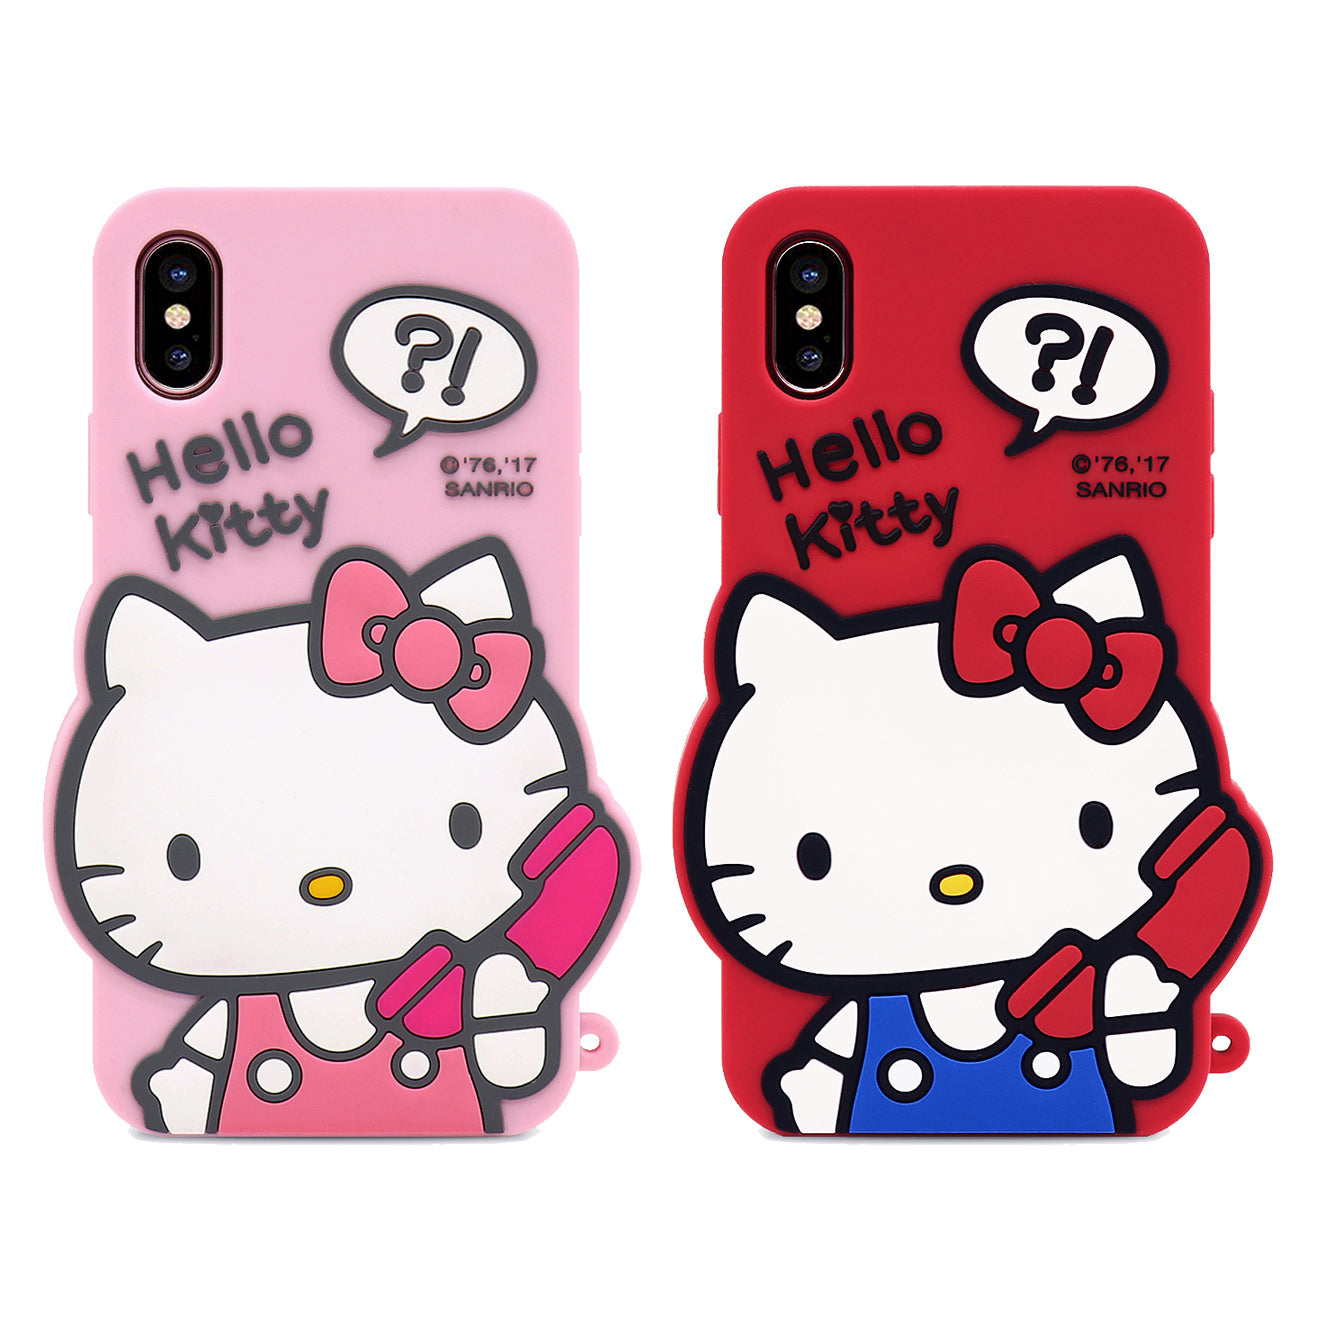 GARMMA Hello Kitty Shockproof Silicone Back Cover Case for Apple iPhon –  Armor King Case